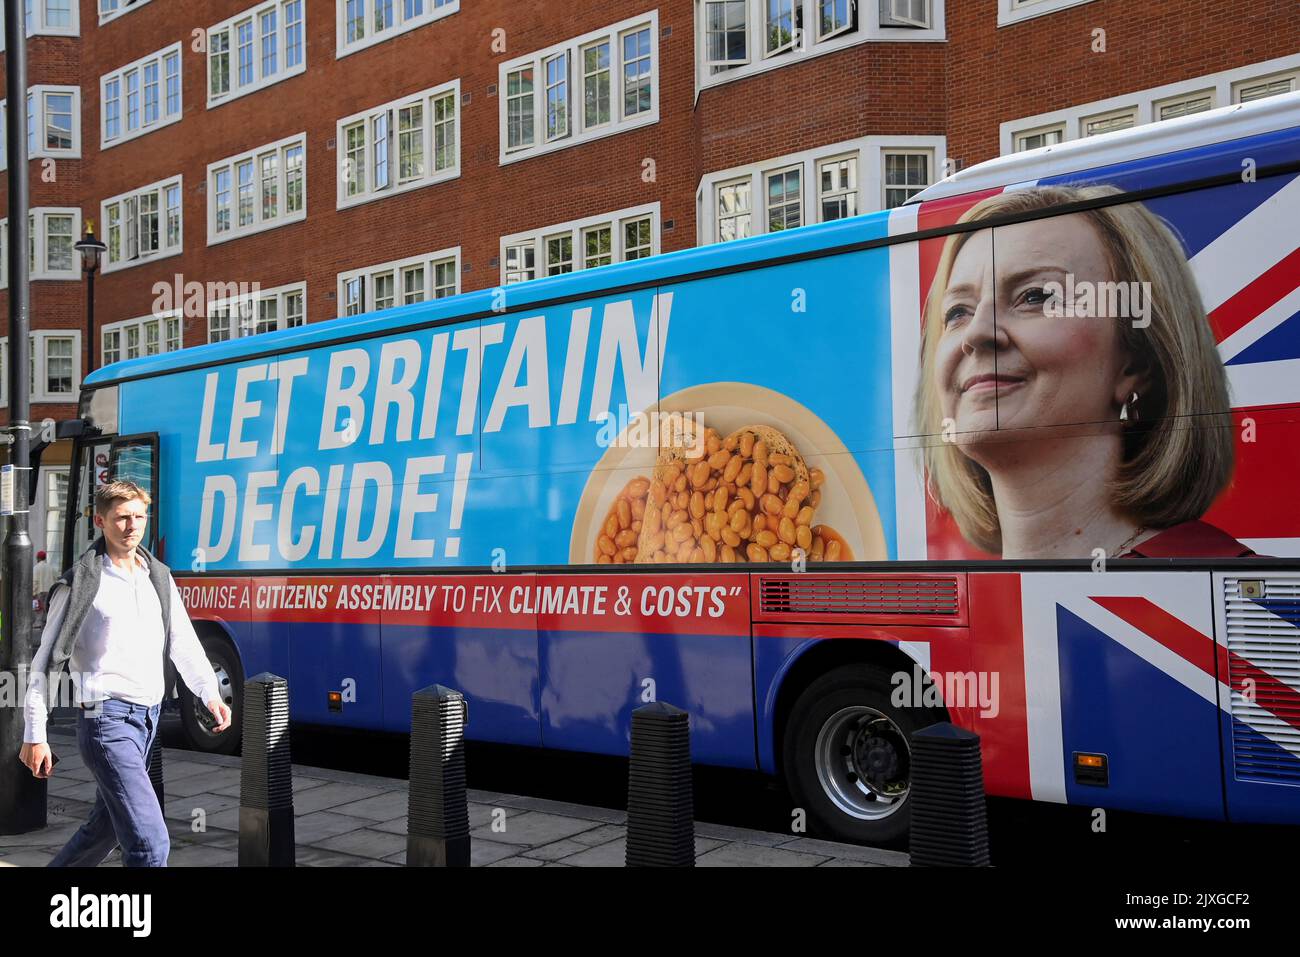 A man walks past an image of new British Prime Minister Liz Truss on the side of a protest bus calling for a citizens assembly, parked in central London, Britain September 7, 2022. REUTERS/Toby Melville Stock Photo